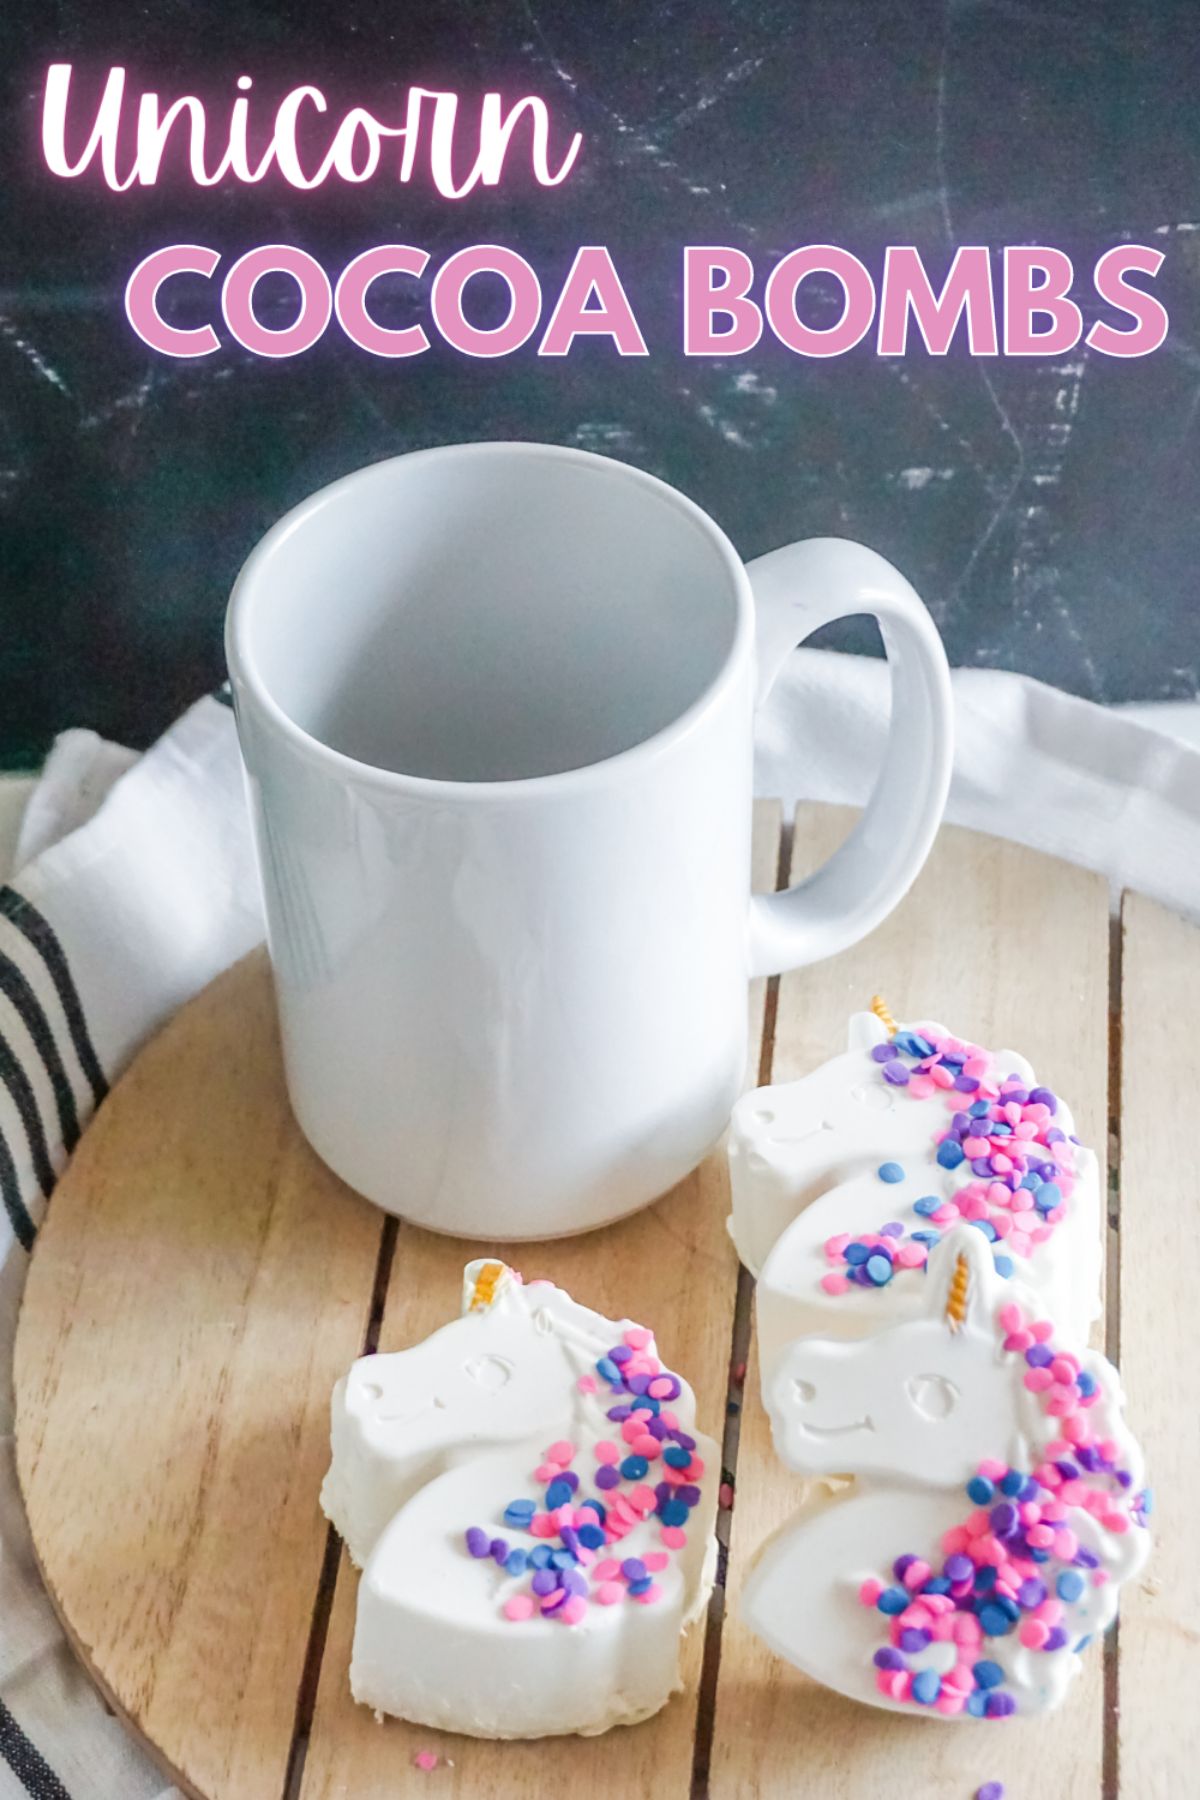 These Unicorn Hot Cocoa Bombs are perfect for those chilly winter nights. Not only do these taste delicious but they look awesome too! #hotcocoabombs #cocoabombs #hotcocoa #unicorn #recipe via @wondermomwannab